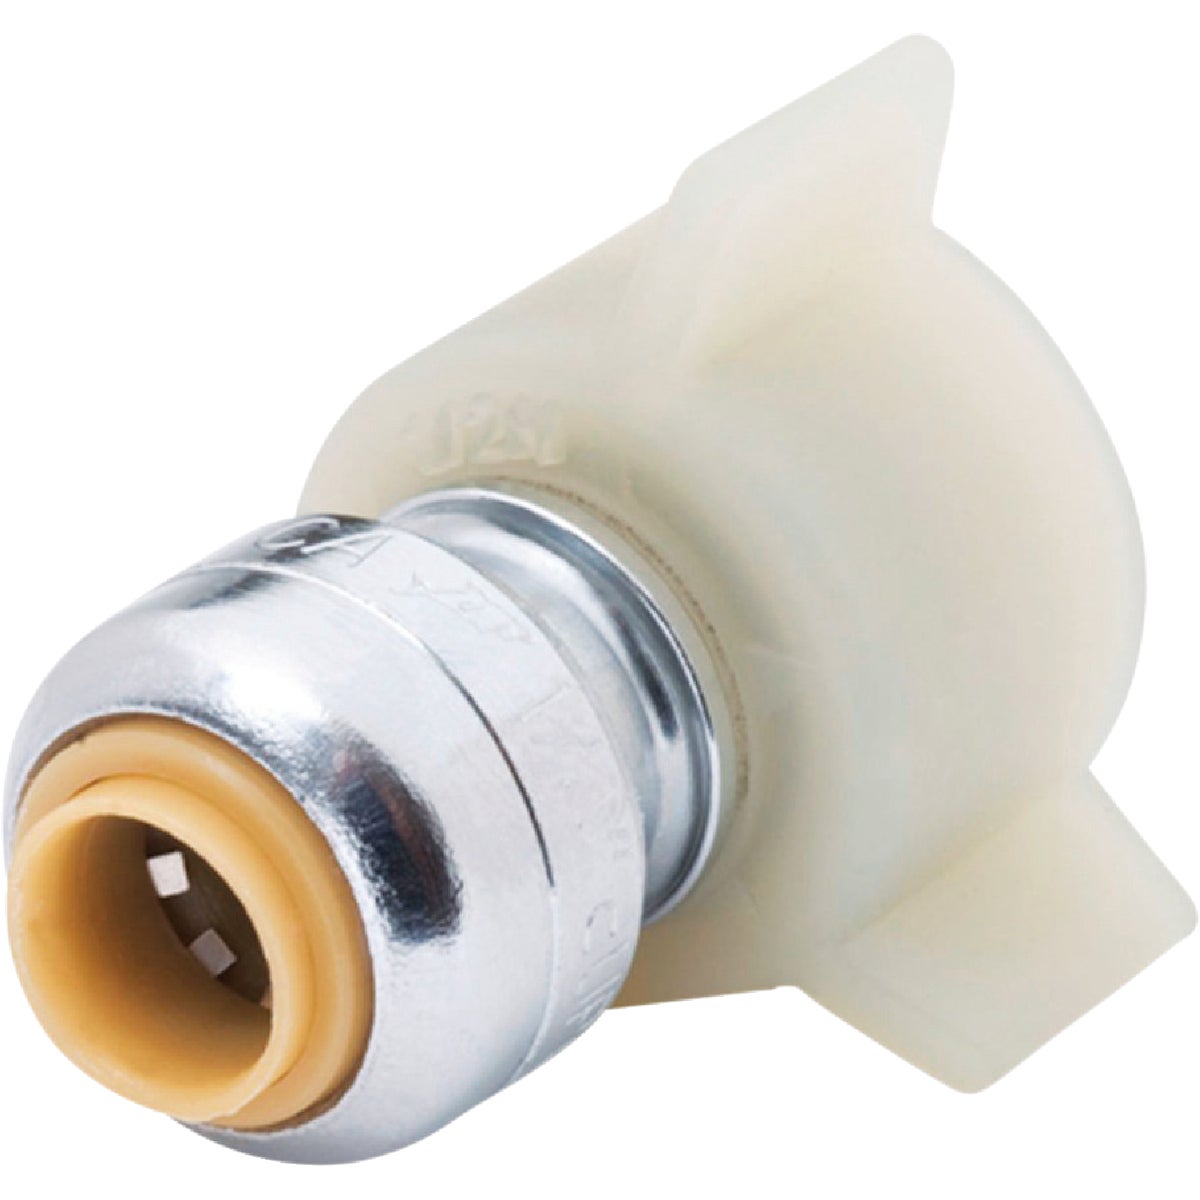 SharkBite 1/4 In. x 7/8 In. Push-to-Connect Ballcock Toilet Adapter